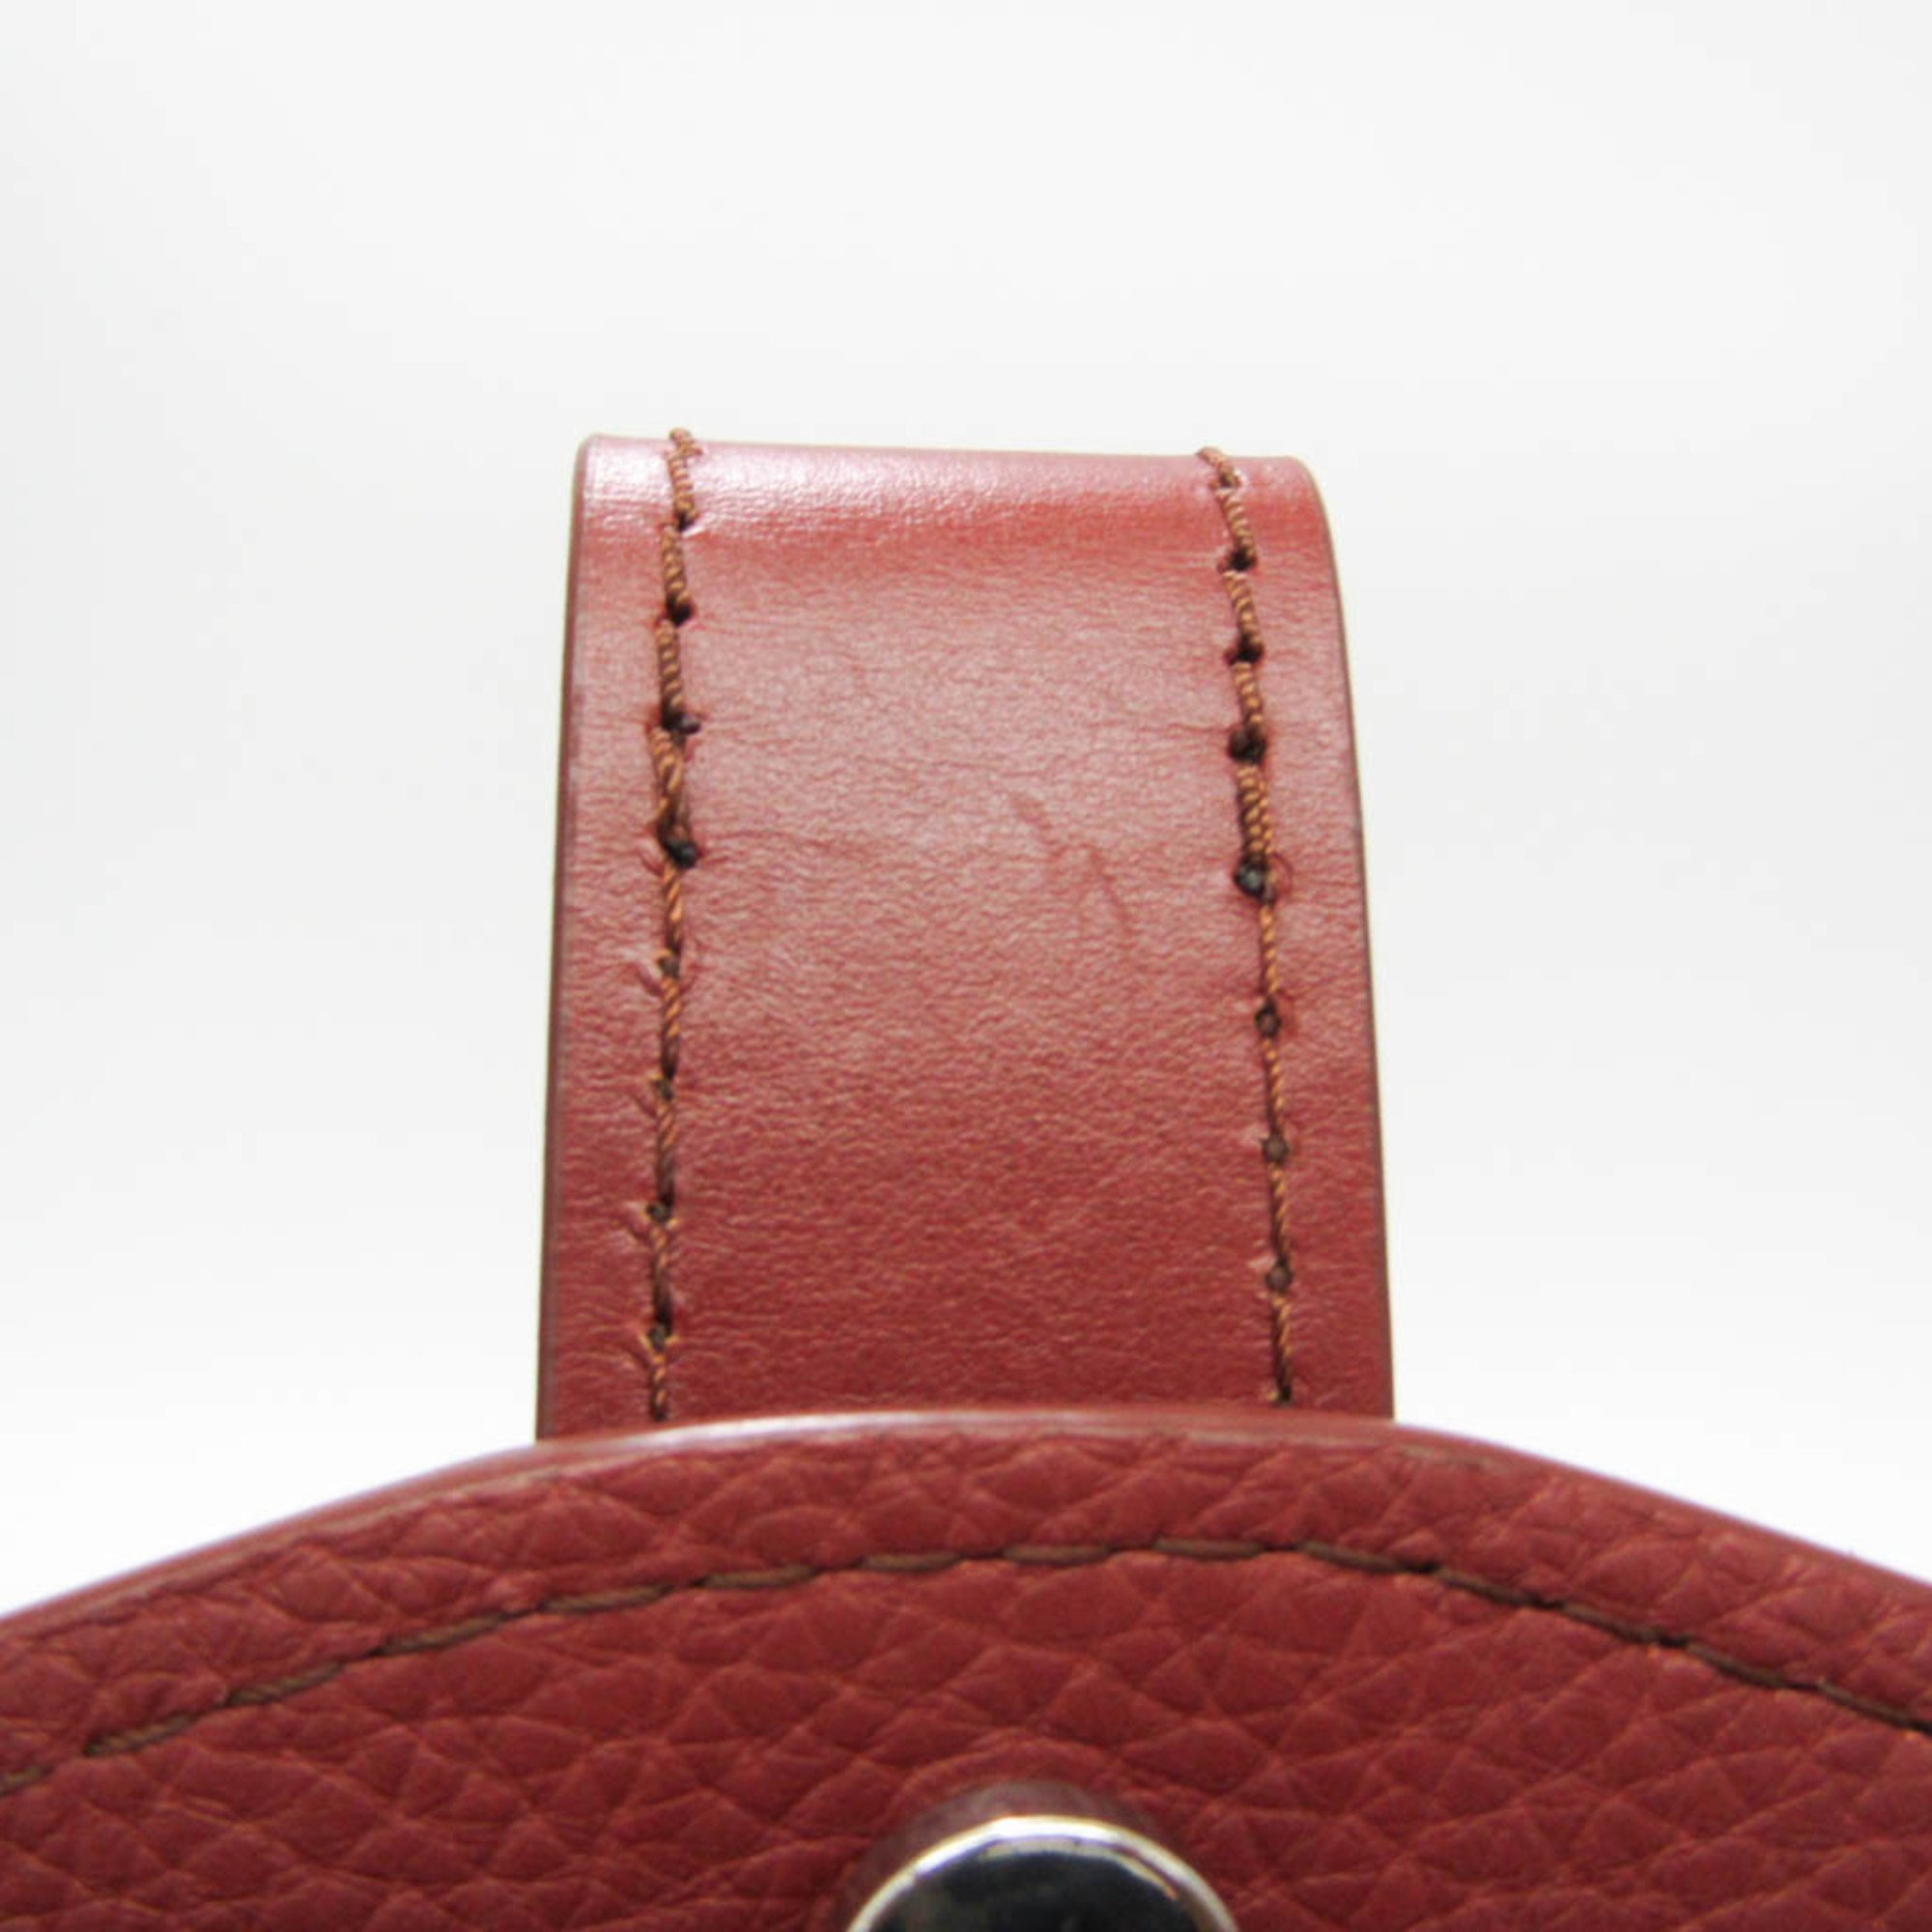 Chloé ABY S20B71P Women's Leather Shoulder Bag Red Brown